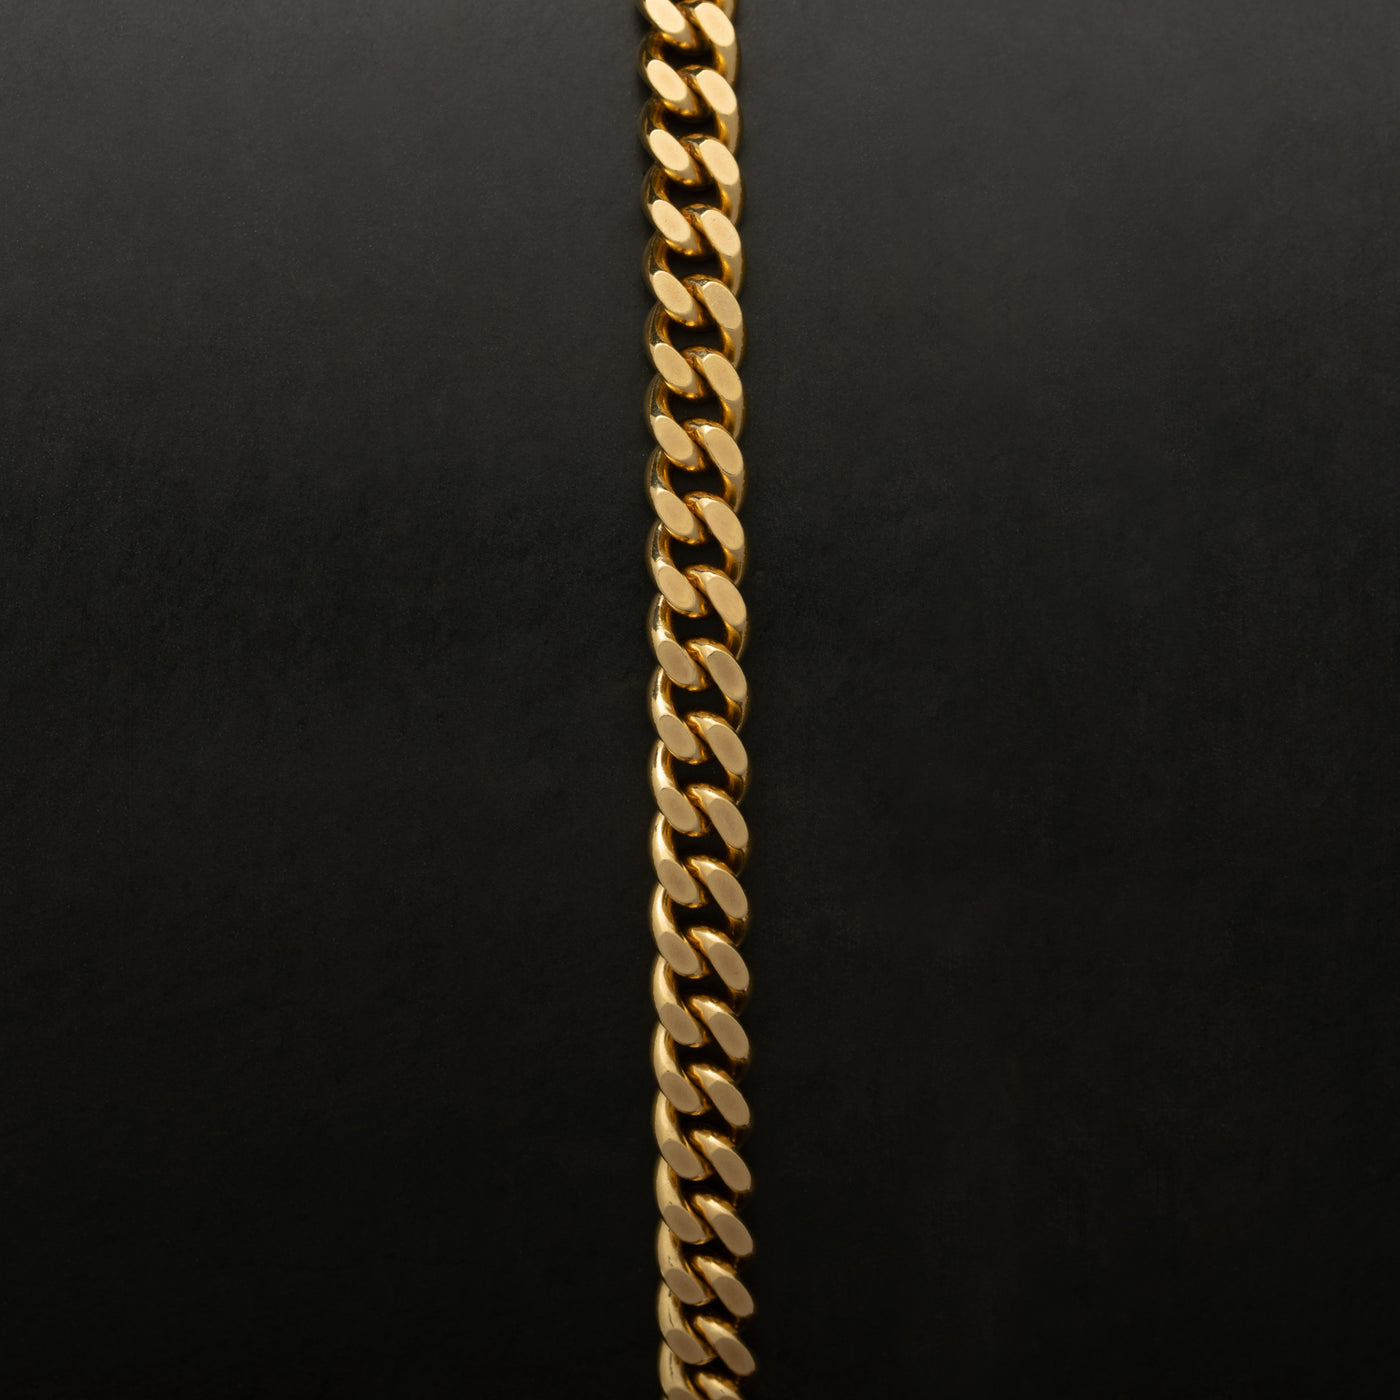 14K SOLID GOLD 4MM CUBAN LINK CHAIN